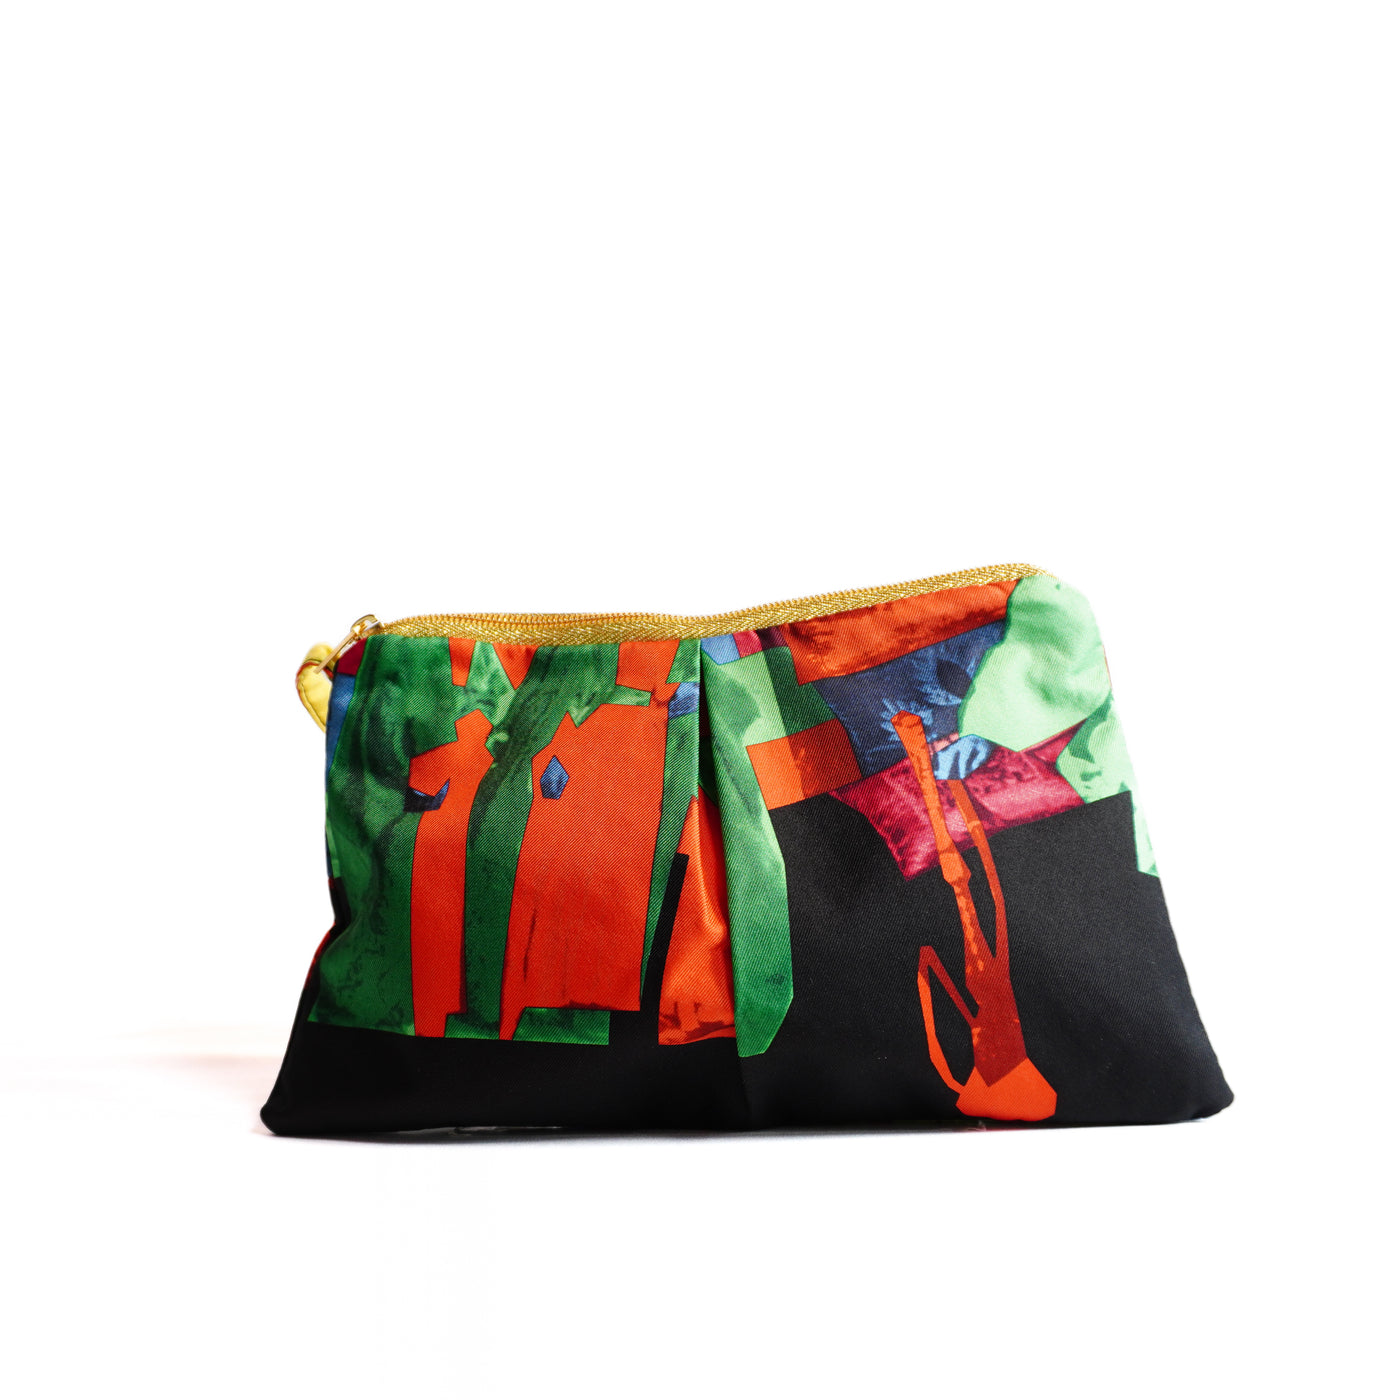 "Pierre Loti ou l'Ame Voyageuse" Scarf Bag (Upcycled from Hermes Scarf) Party Clutch Hampton Road Designs   